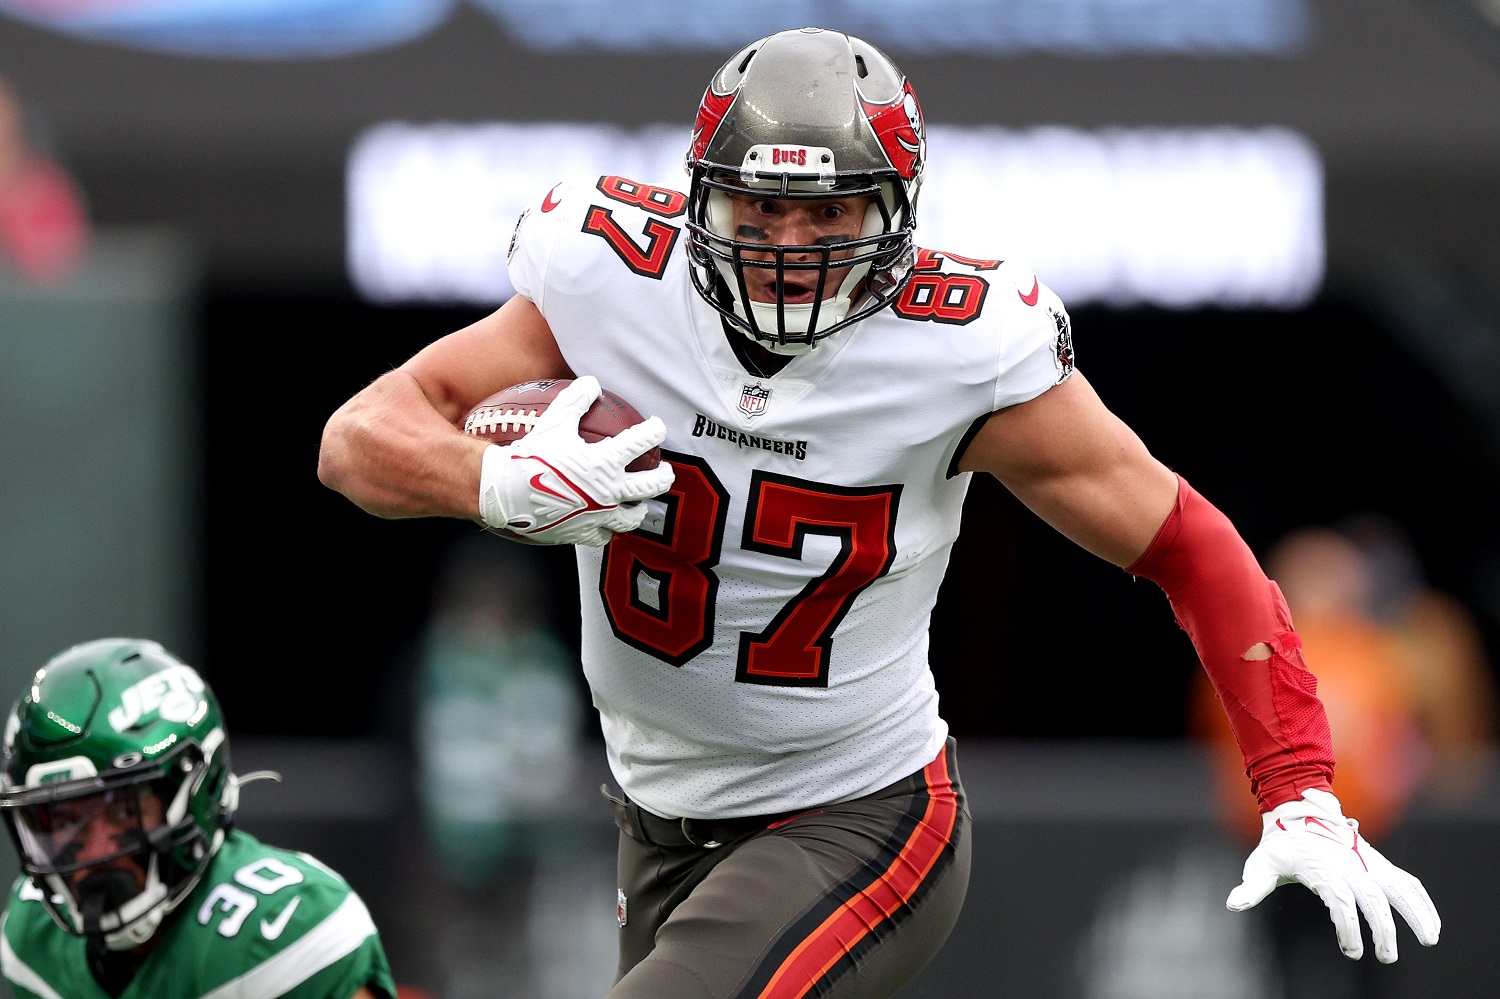 Rob Gronkowski runs with the ball against the New York Jets in the first quarter of the Tampa Bay Buccaneers' game at MetLife Stadium on Jan. 2, 2022, in East Rutherford, New Jersey. | Elsa/Getty Images